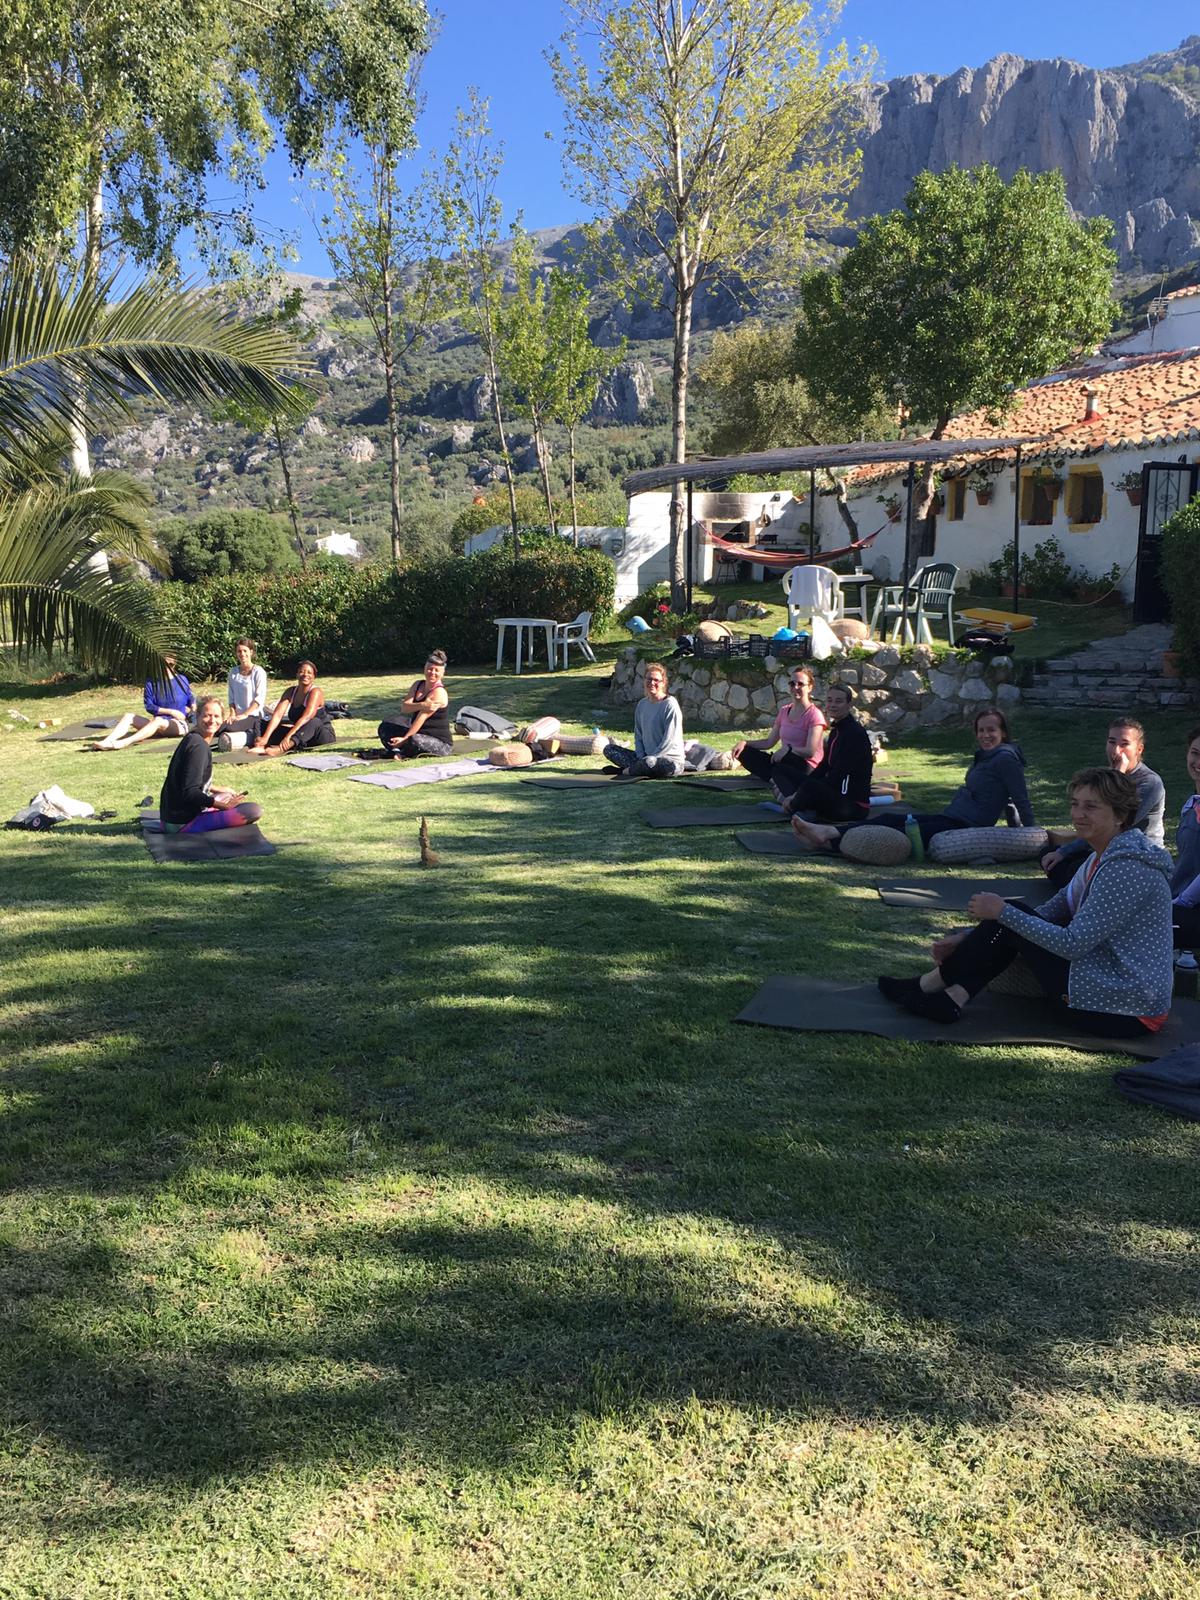 Yoga practice in the garden at Yin Yang Yoga retreat in the Malaga mountains in Spain with Jane Bakx Yoga (Copy) (Copy)